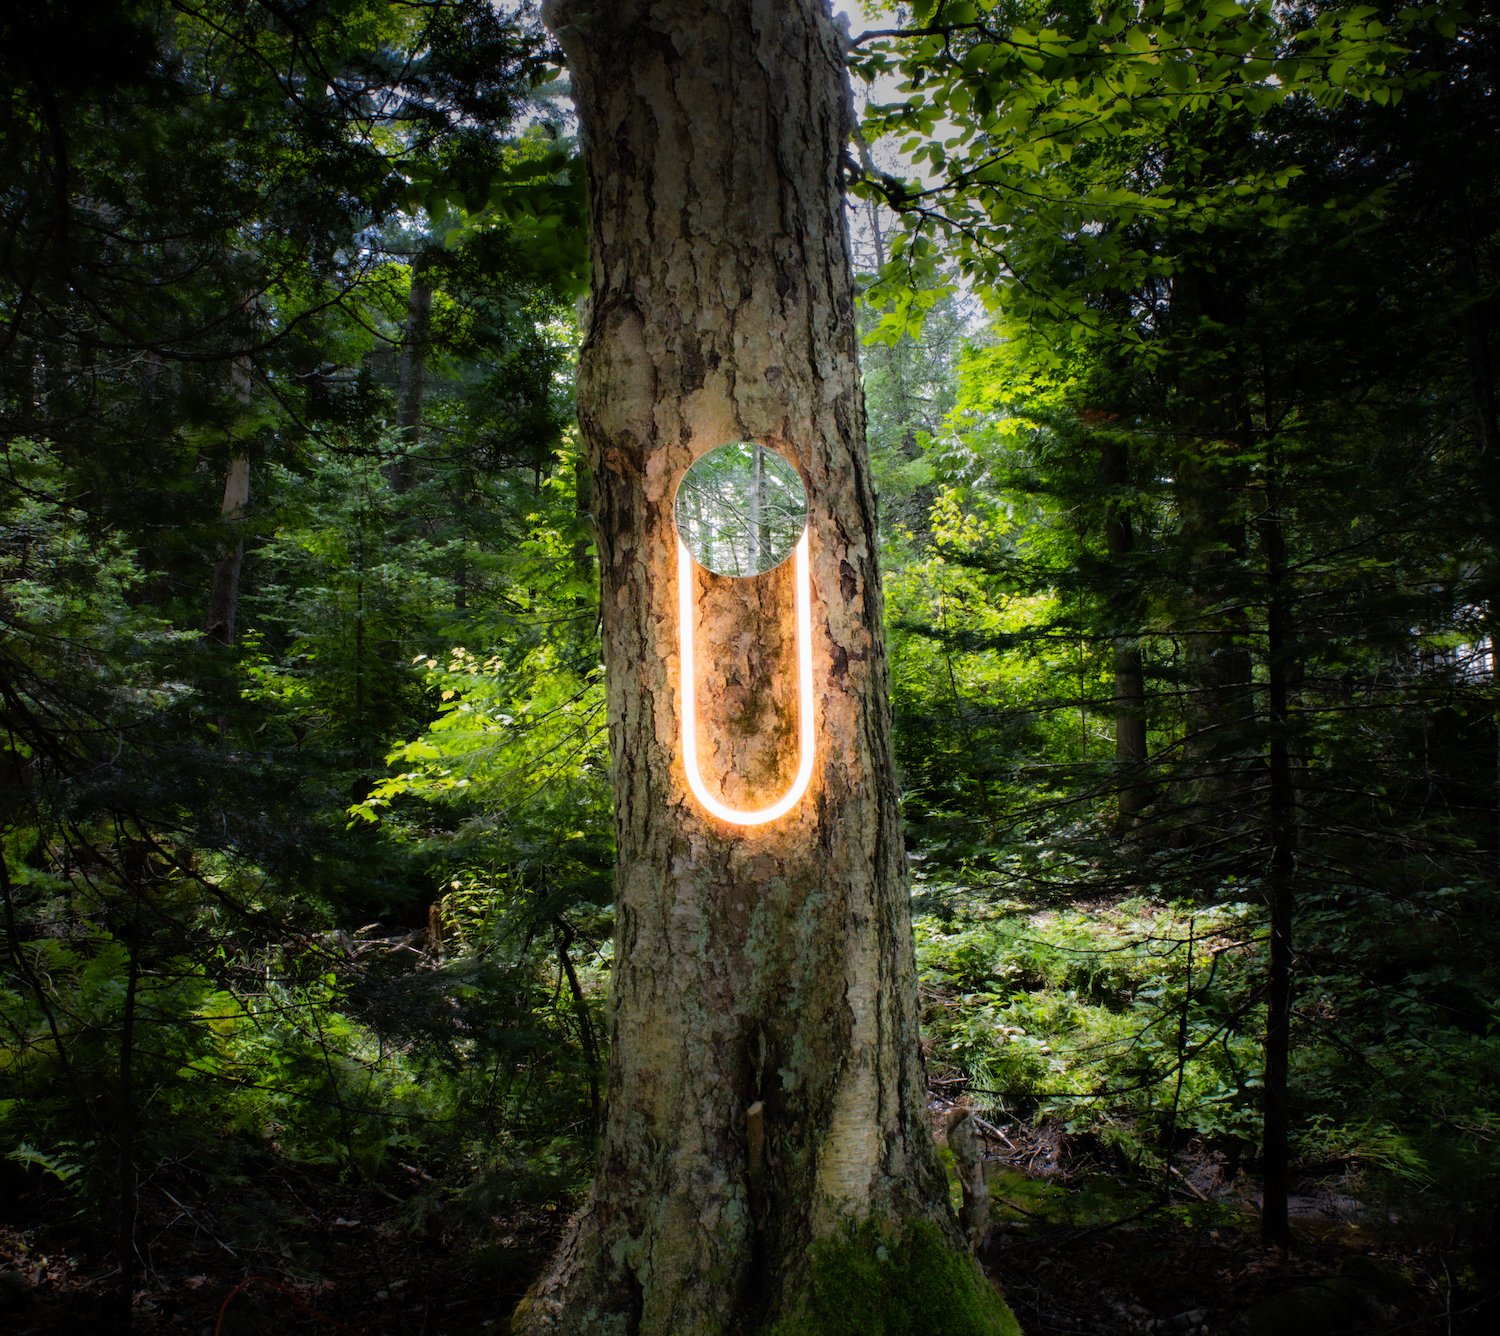 Ra Wall Light fixture in Canadian forest